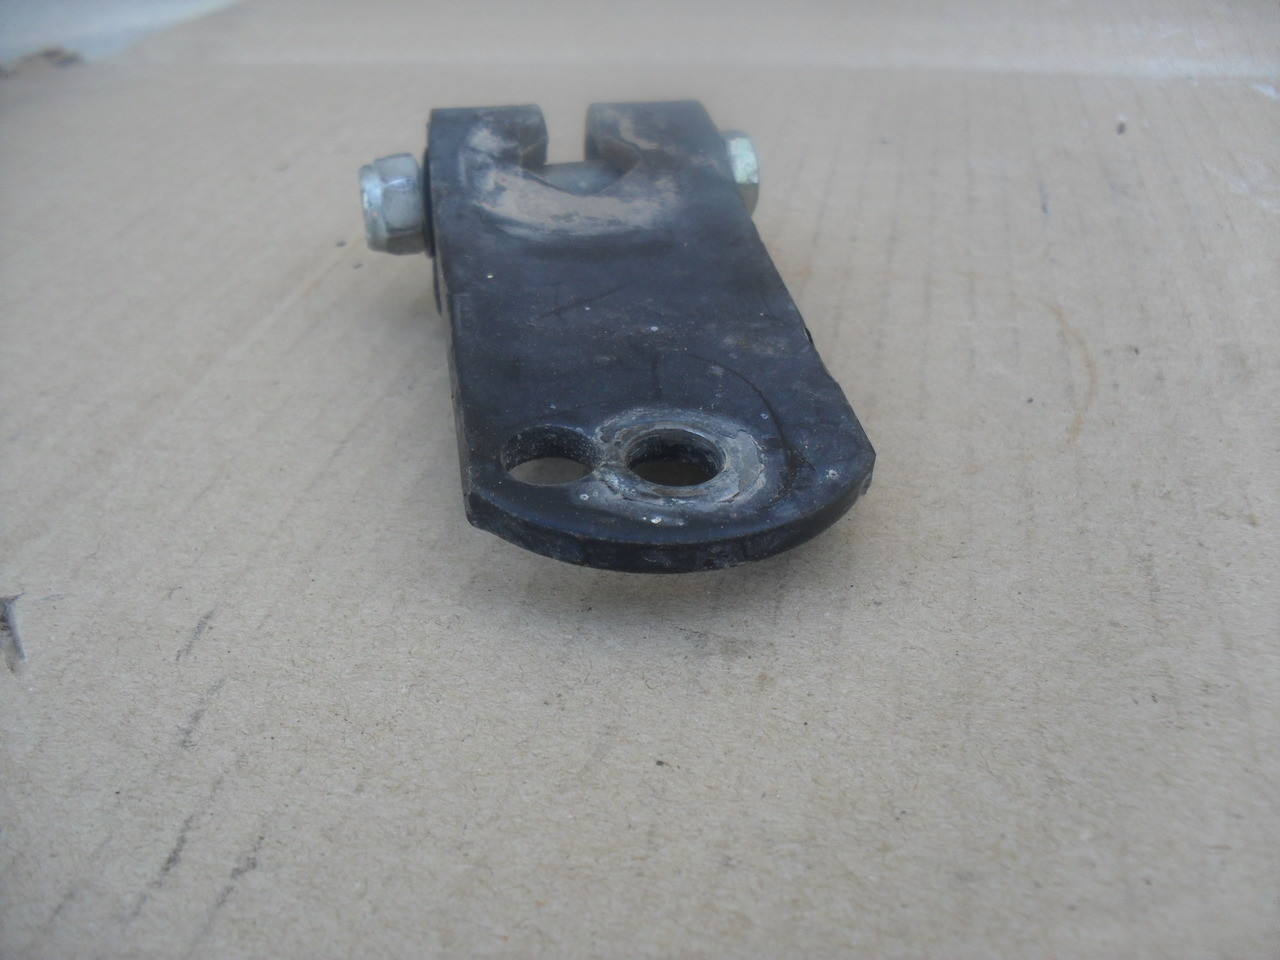 Steering Arm for MTD 16481, 16481A, 683-0055, 983-0055, 983-0055-0637, Used